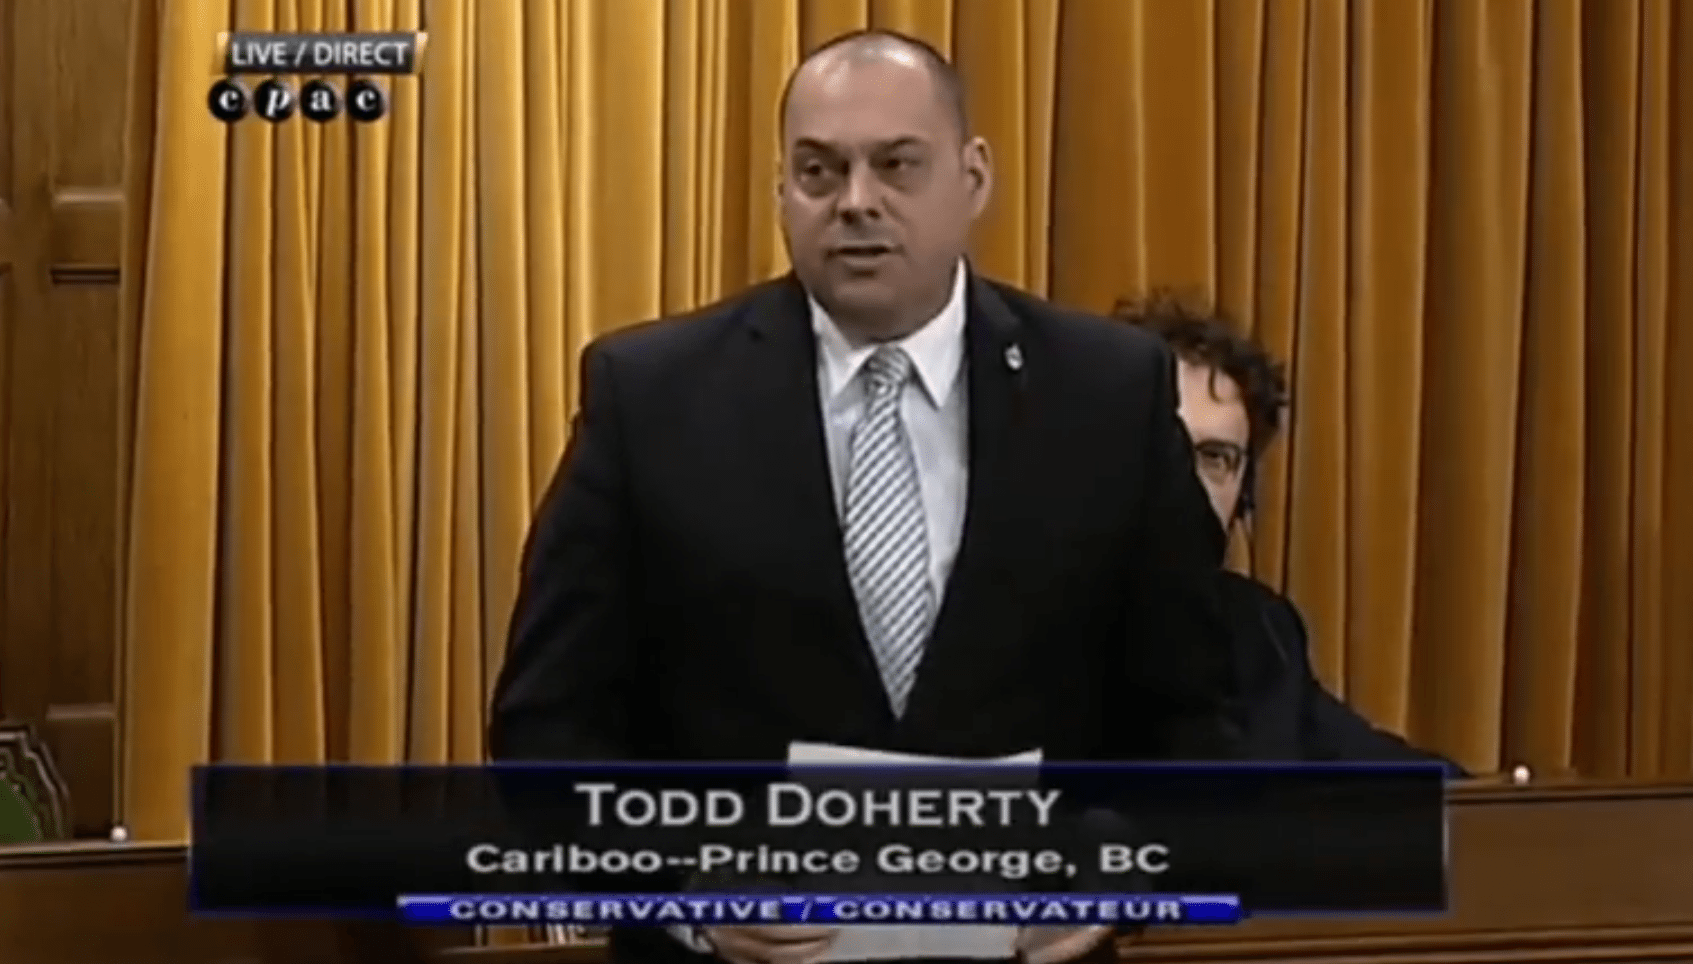 “Canadians should be very afraid” of Budget says Doherty